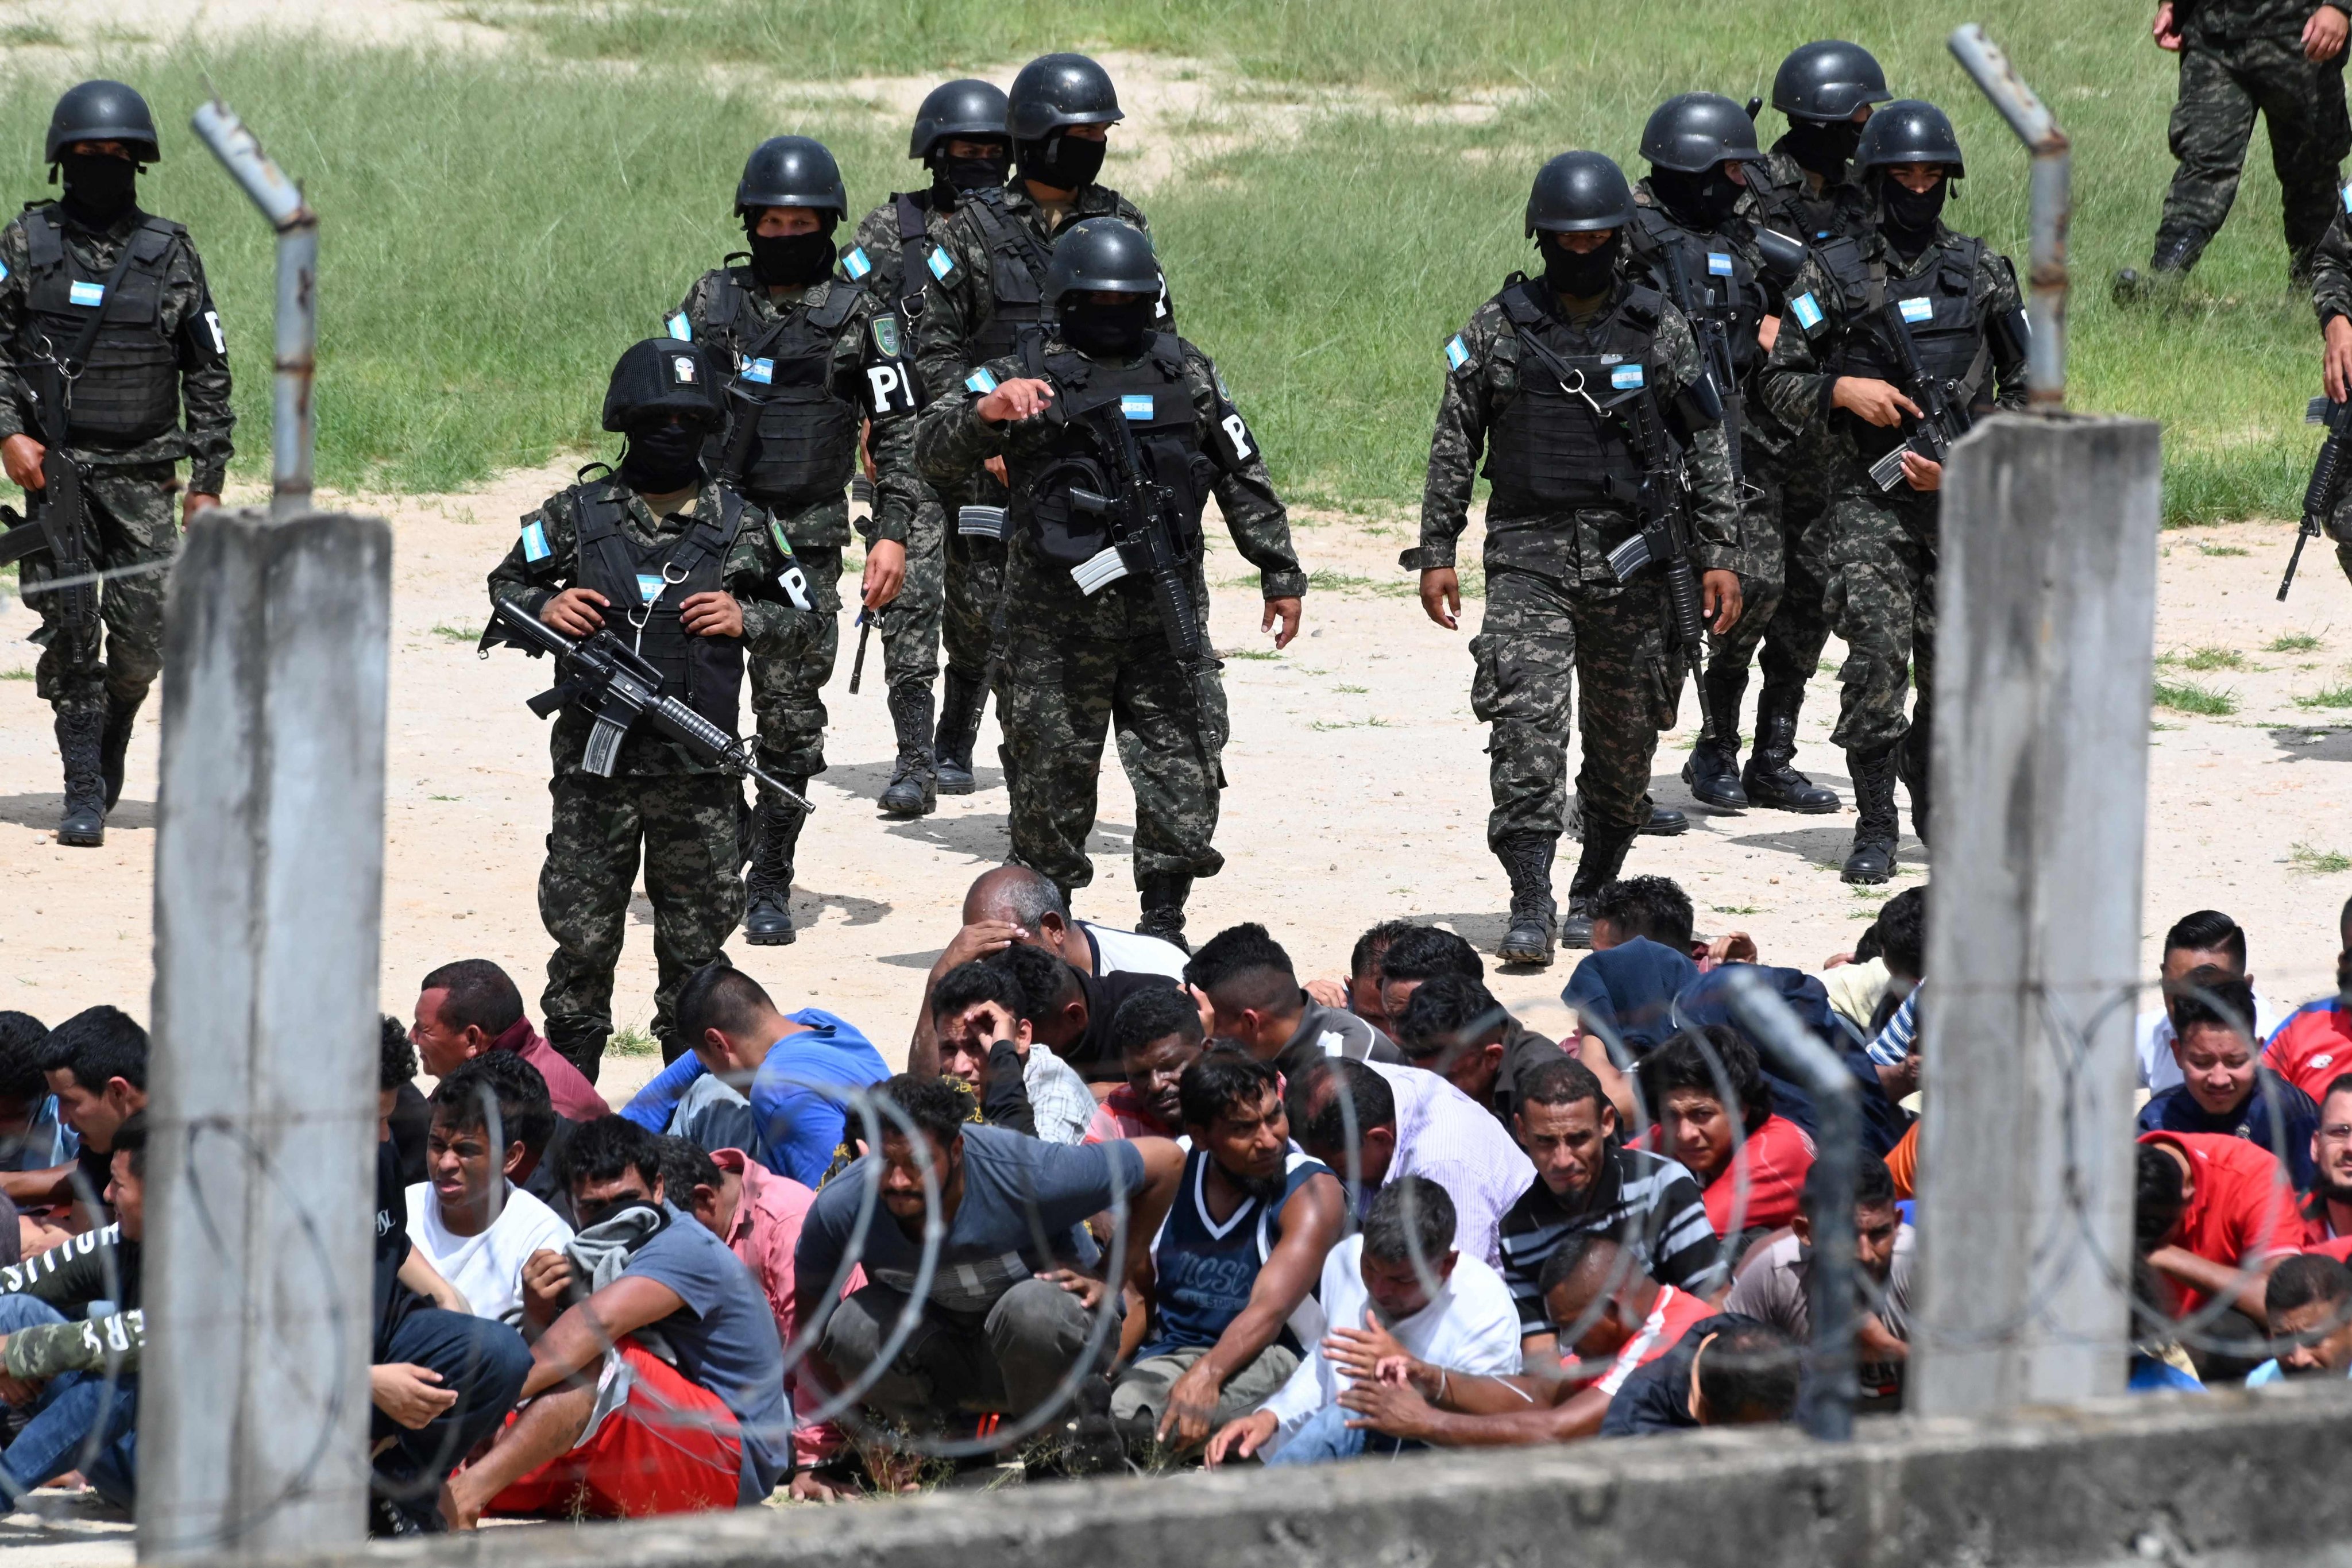 Members of the Military Police of Public Order check and frisk inmates of the National Penitentiary “Francisco Morazan” in Tamara, Honduras, in June 2023. Photo: AFP